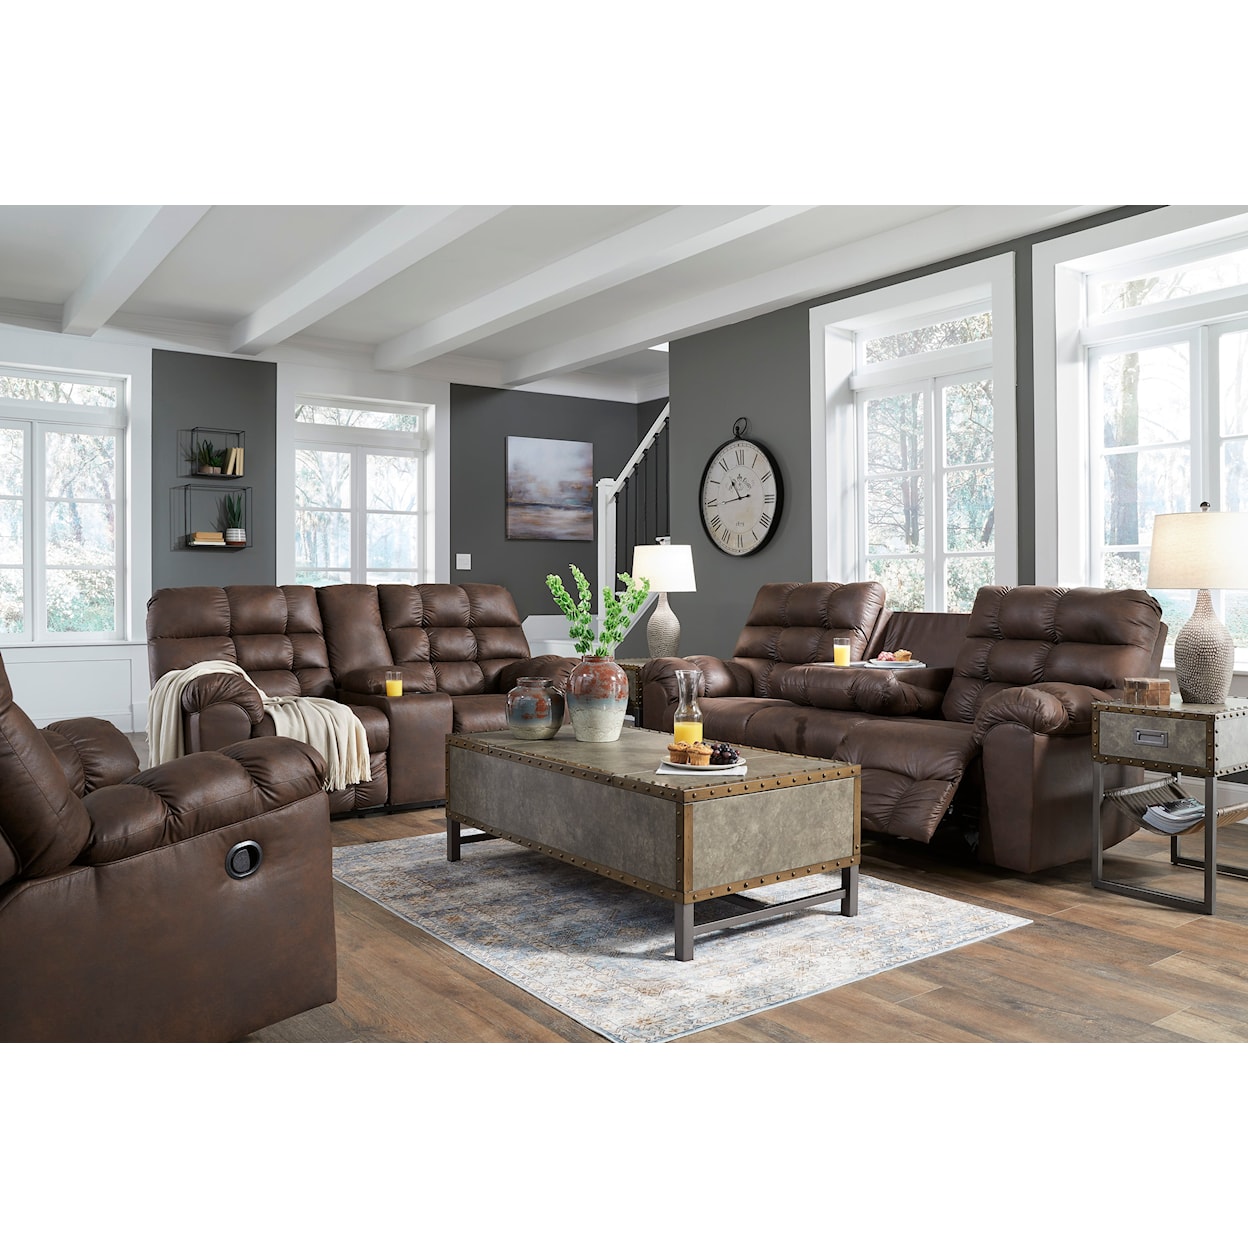 Ashley Furniture Signature Design Derwin Reclining Sofa with Drop Down Table